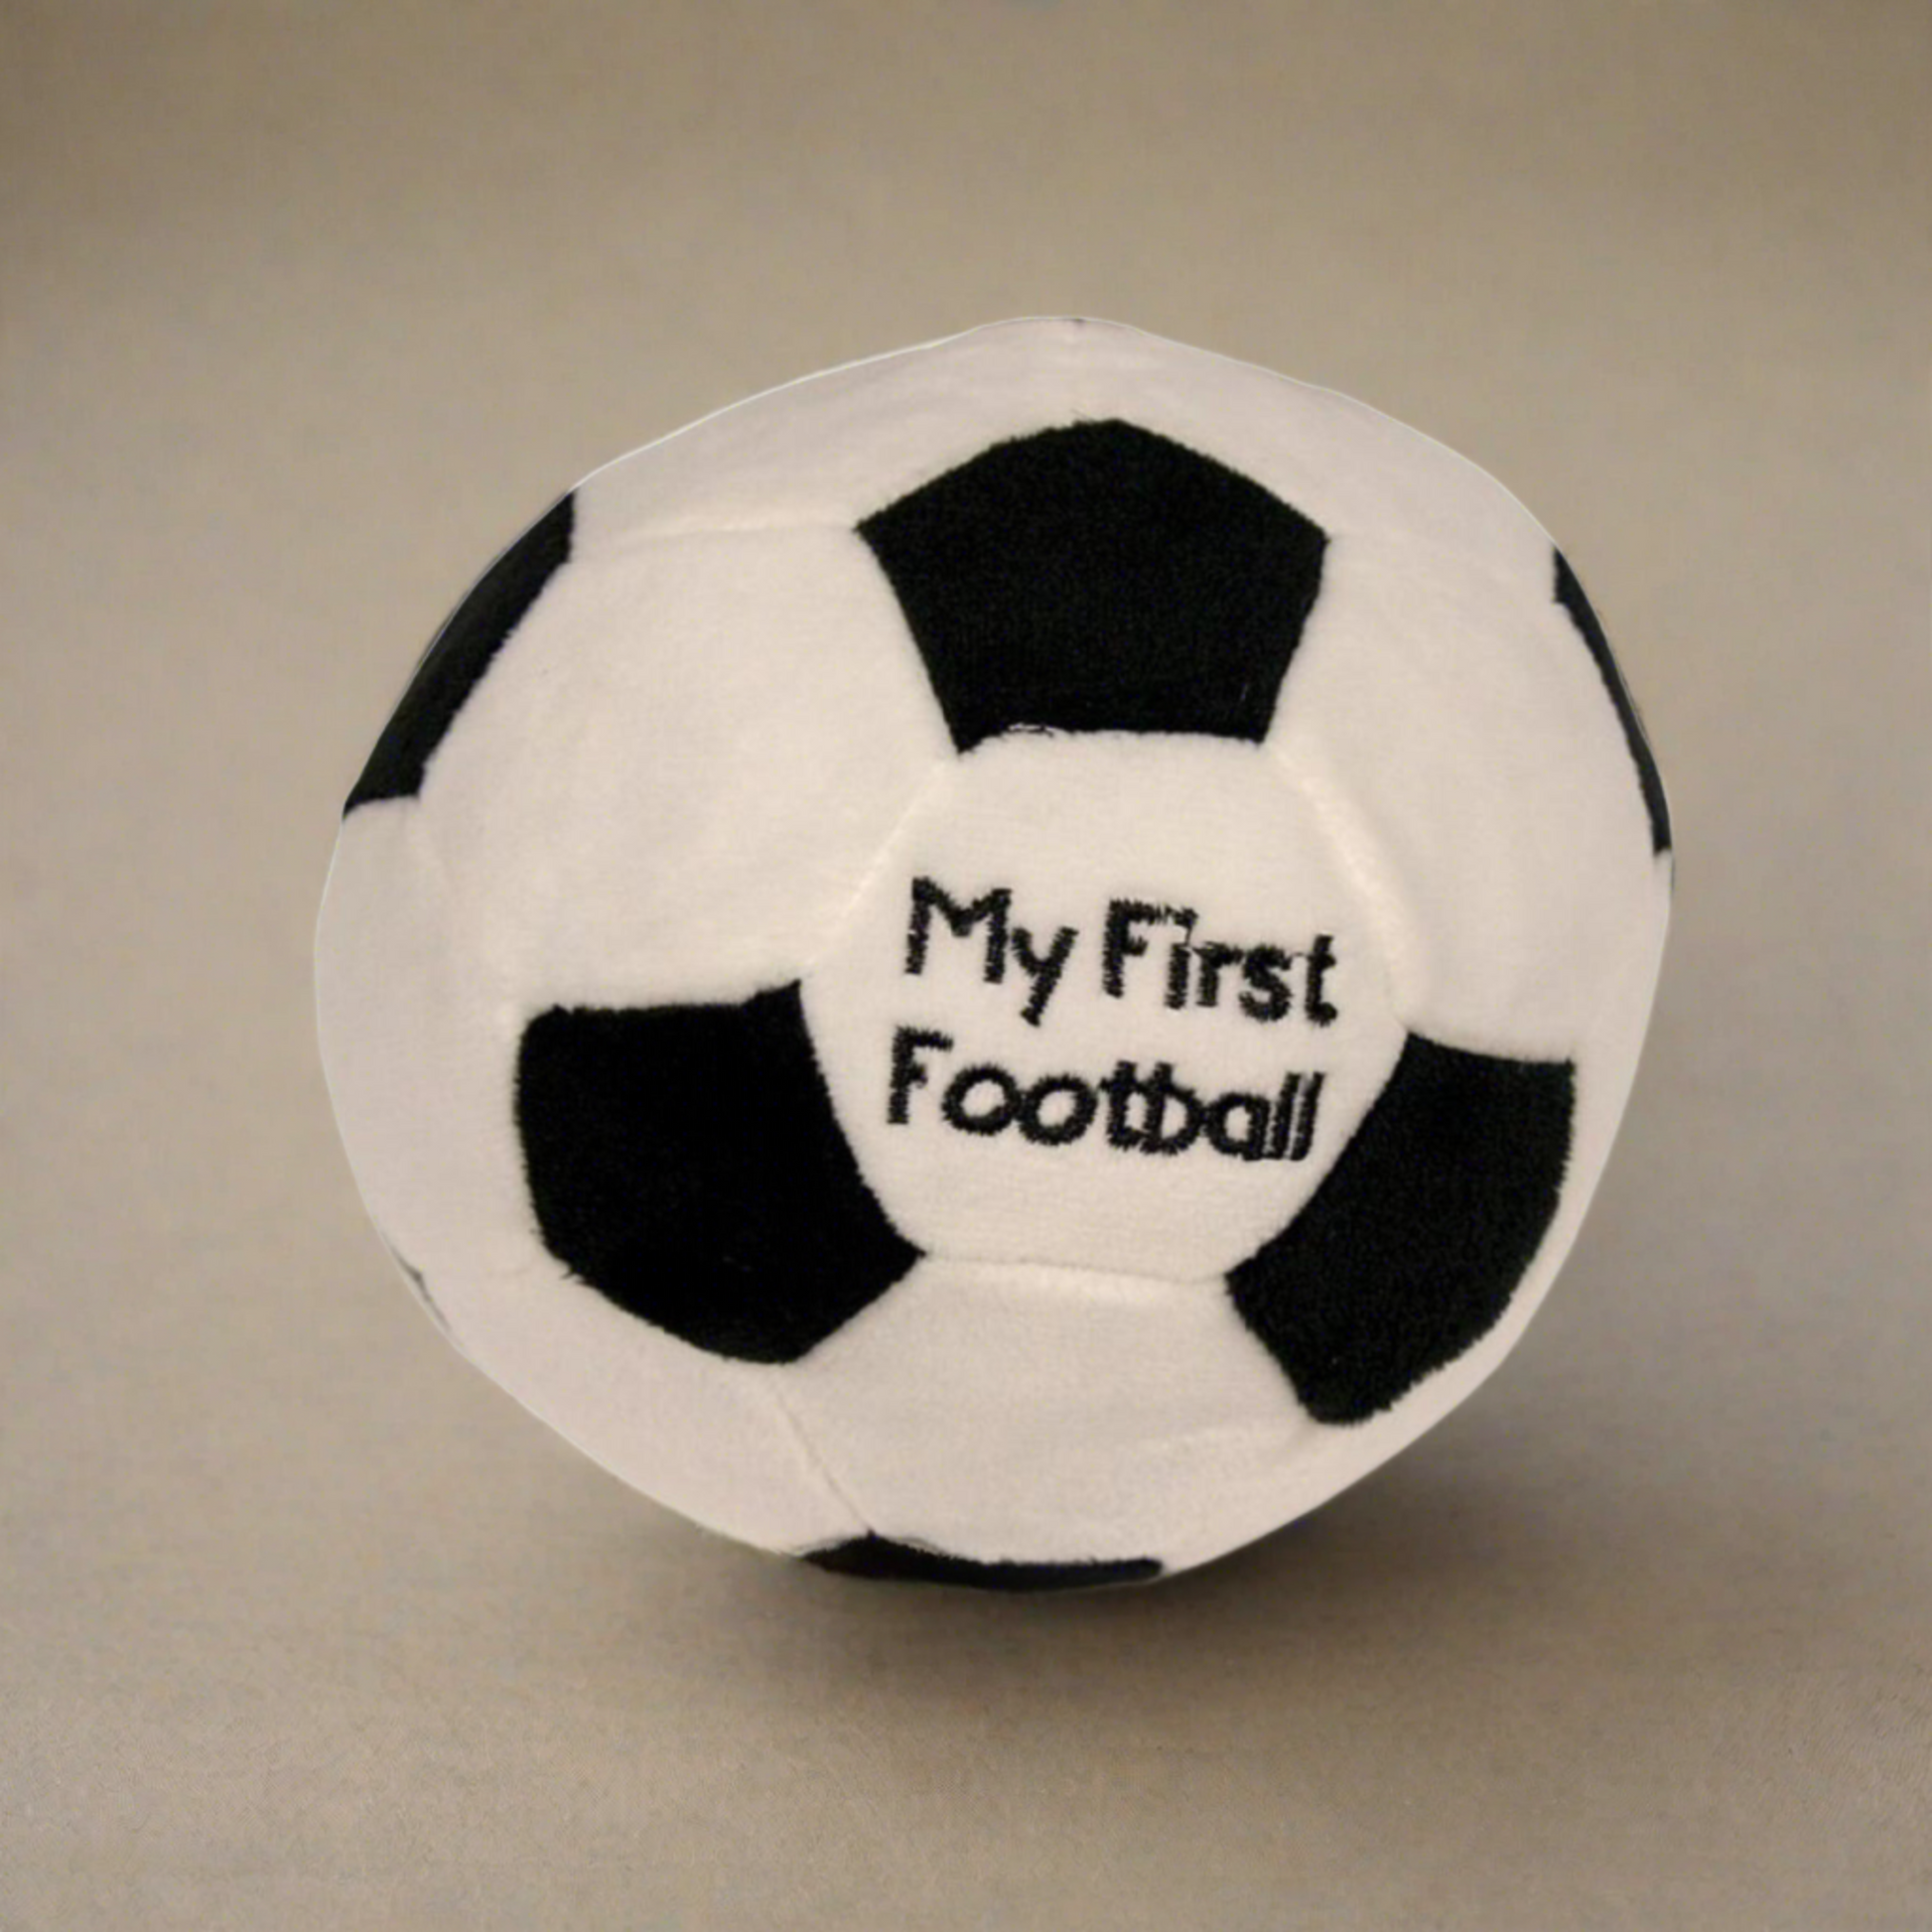 Soft baby toy, my first football. Measuring 15cm made from soft plush materials with a rattle sound within. (Black and white football)